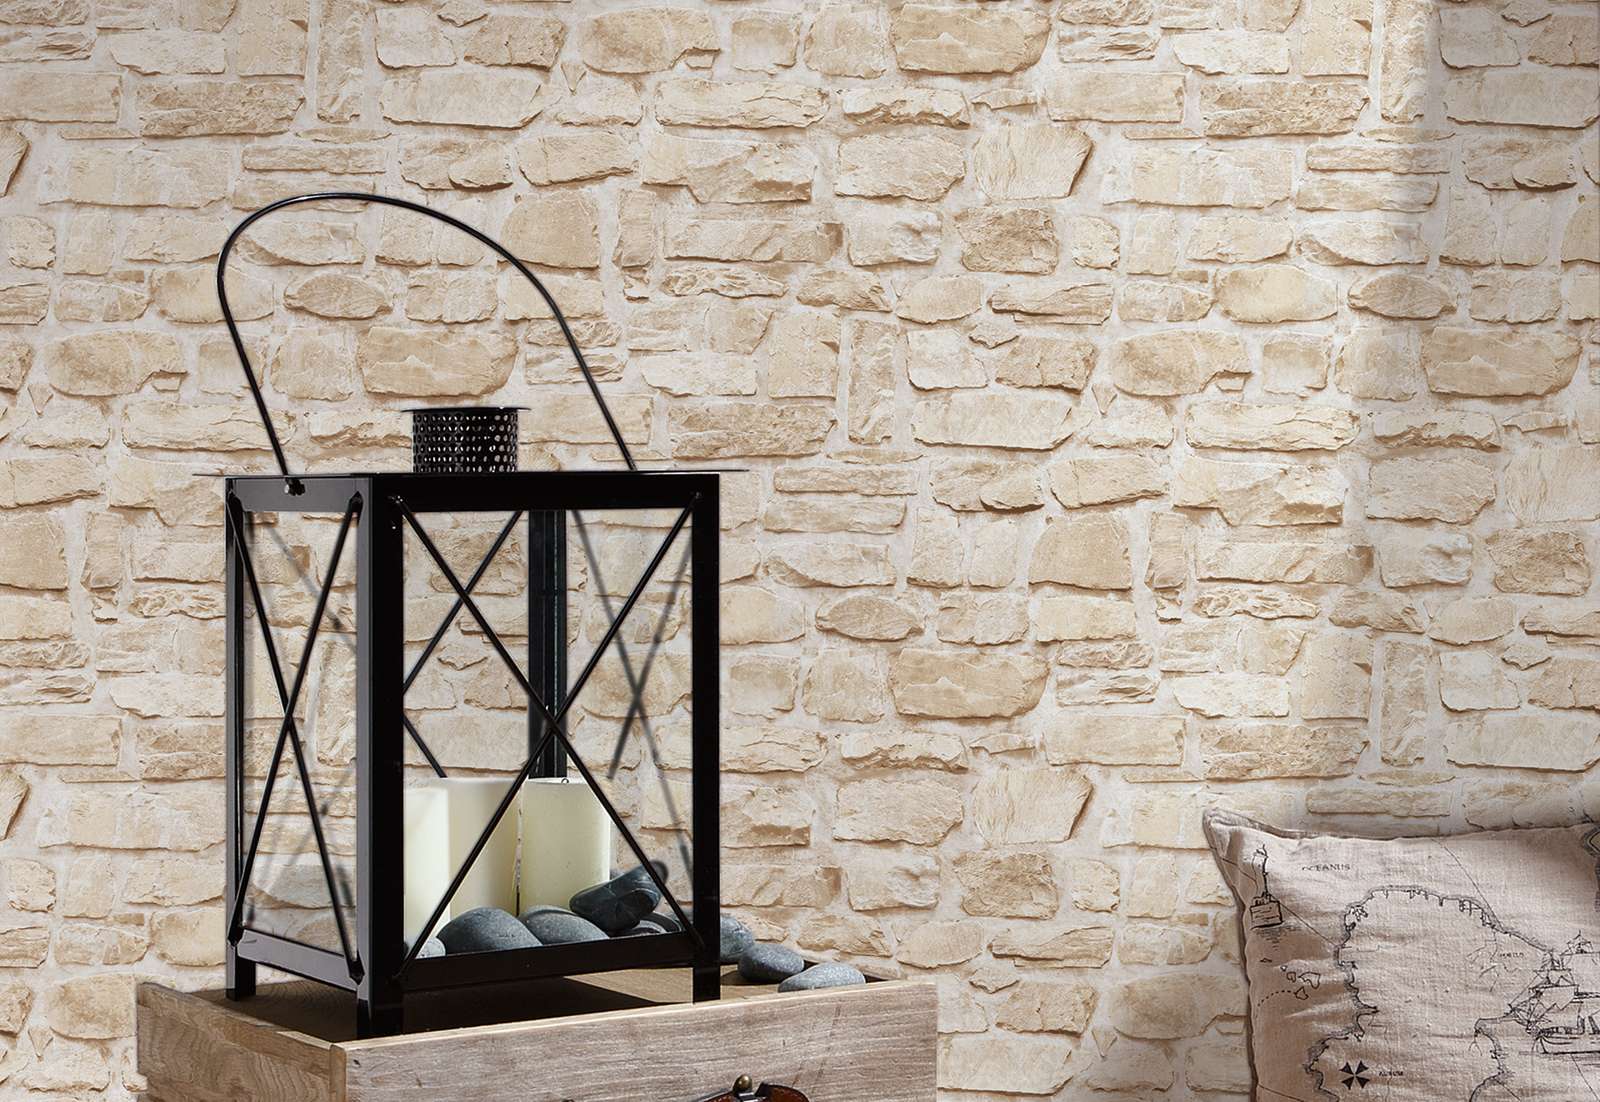             Stone wallpaper with natural stone masonry in country style - beige, yellow
        